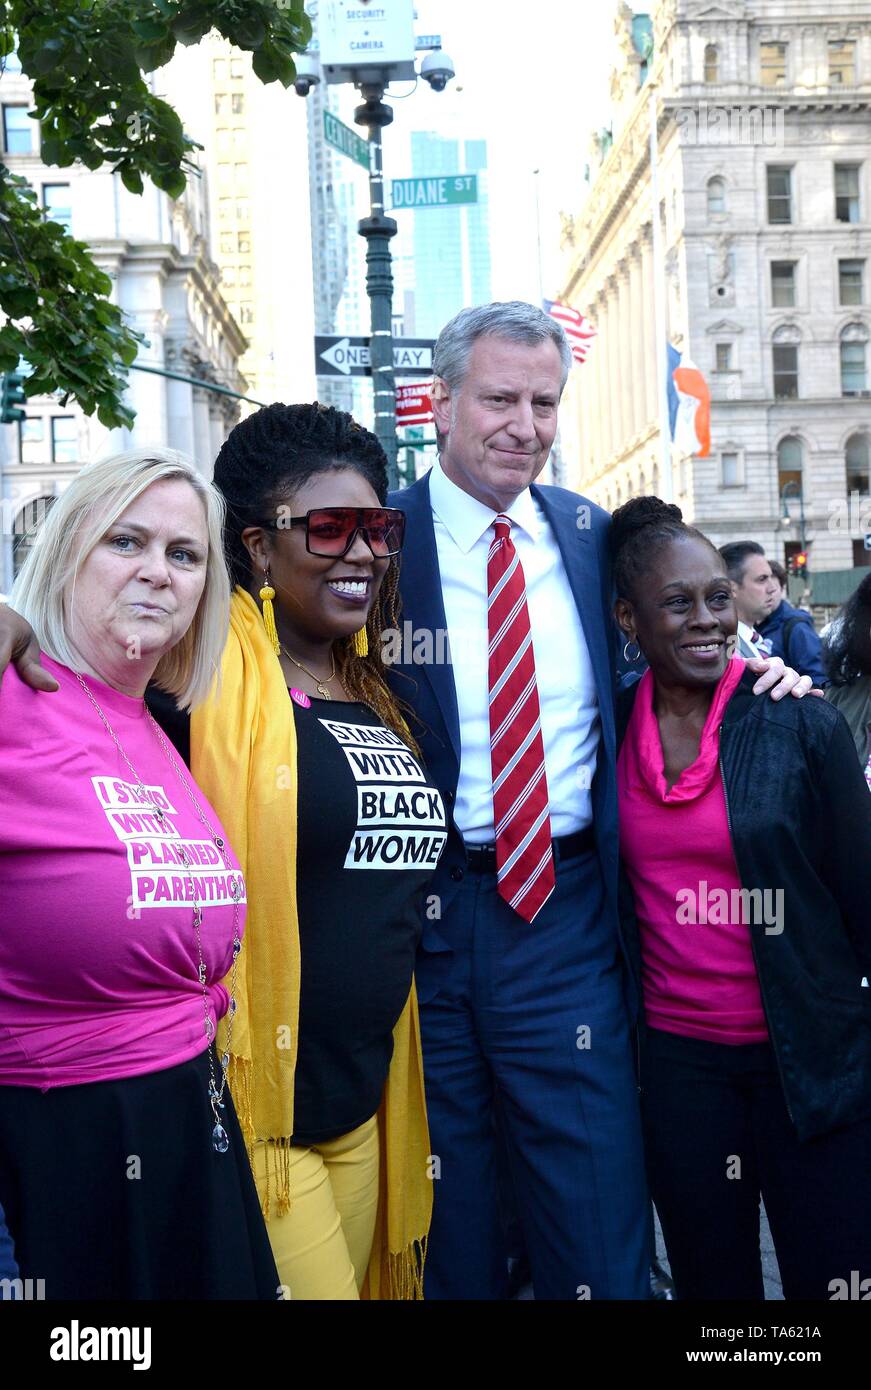 New York, NY, USA. 21st May, 2019. Laura McQuade, Bill De Blasio, Chirlane McCray in attendance for #STOPTHEBANS Planned Parenthood Rally, Foley Square, New York, NY May 21, 2019. Credit: Kristin Callahan/Everett Collection/Alamy Live News Stock Photo